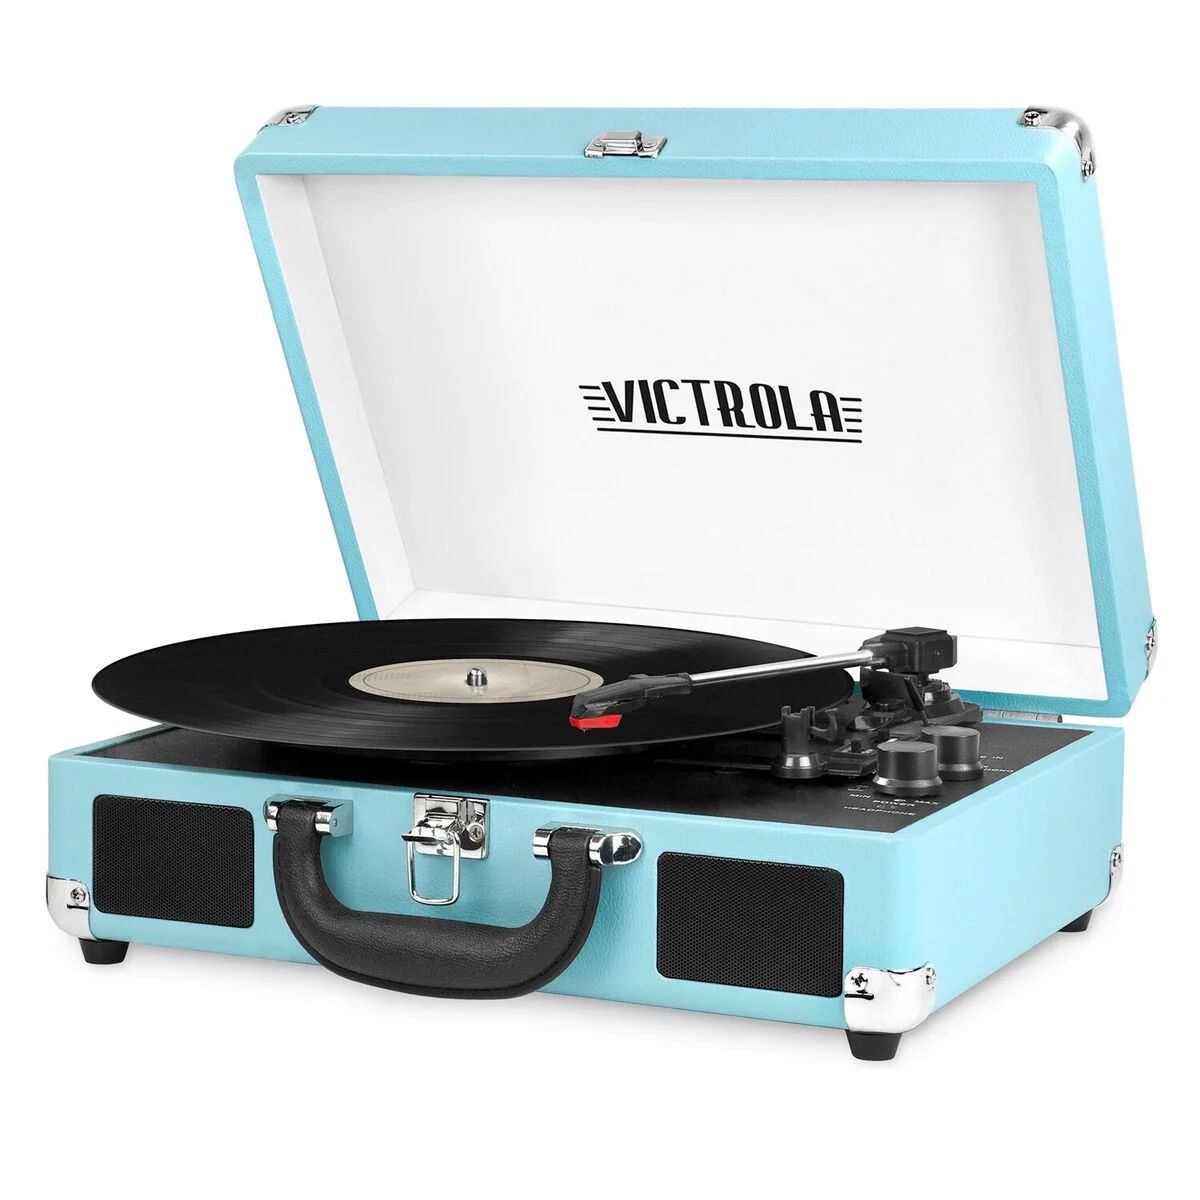 VICTROLA - Victrola Bluetooth Portable Suitcase Record Player with 3-speed Turntable, Turquoise | Walmart (US)